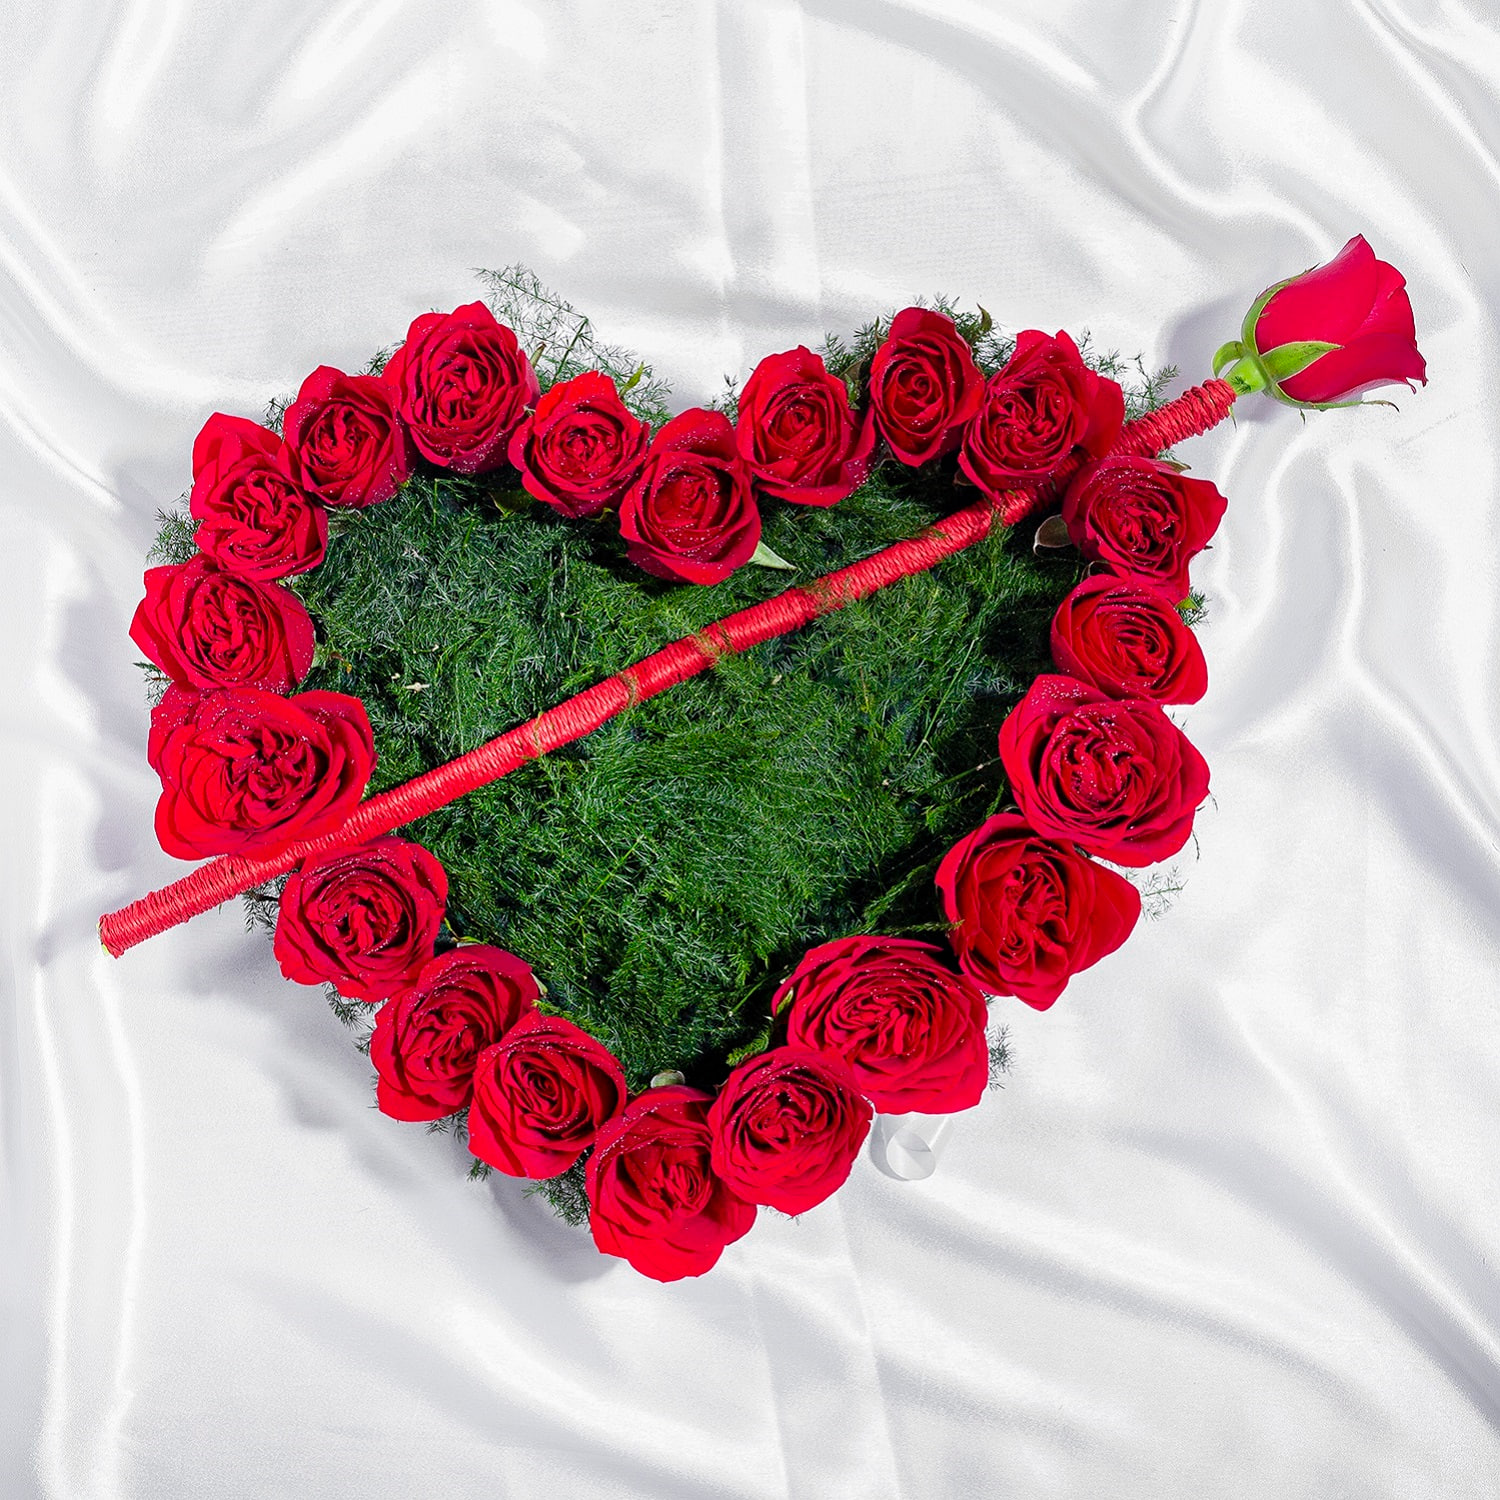 Buy Rose Day Gift Online in Gwalior | Send Rose Day Gifts to Gwalior -  MyFlowerTree